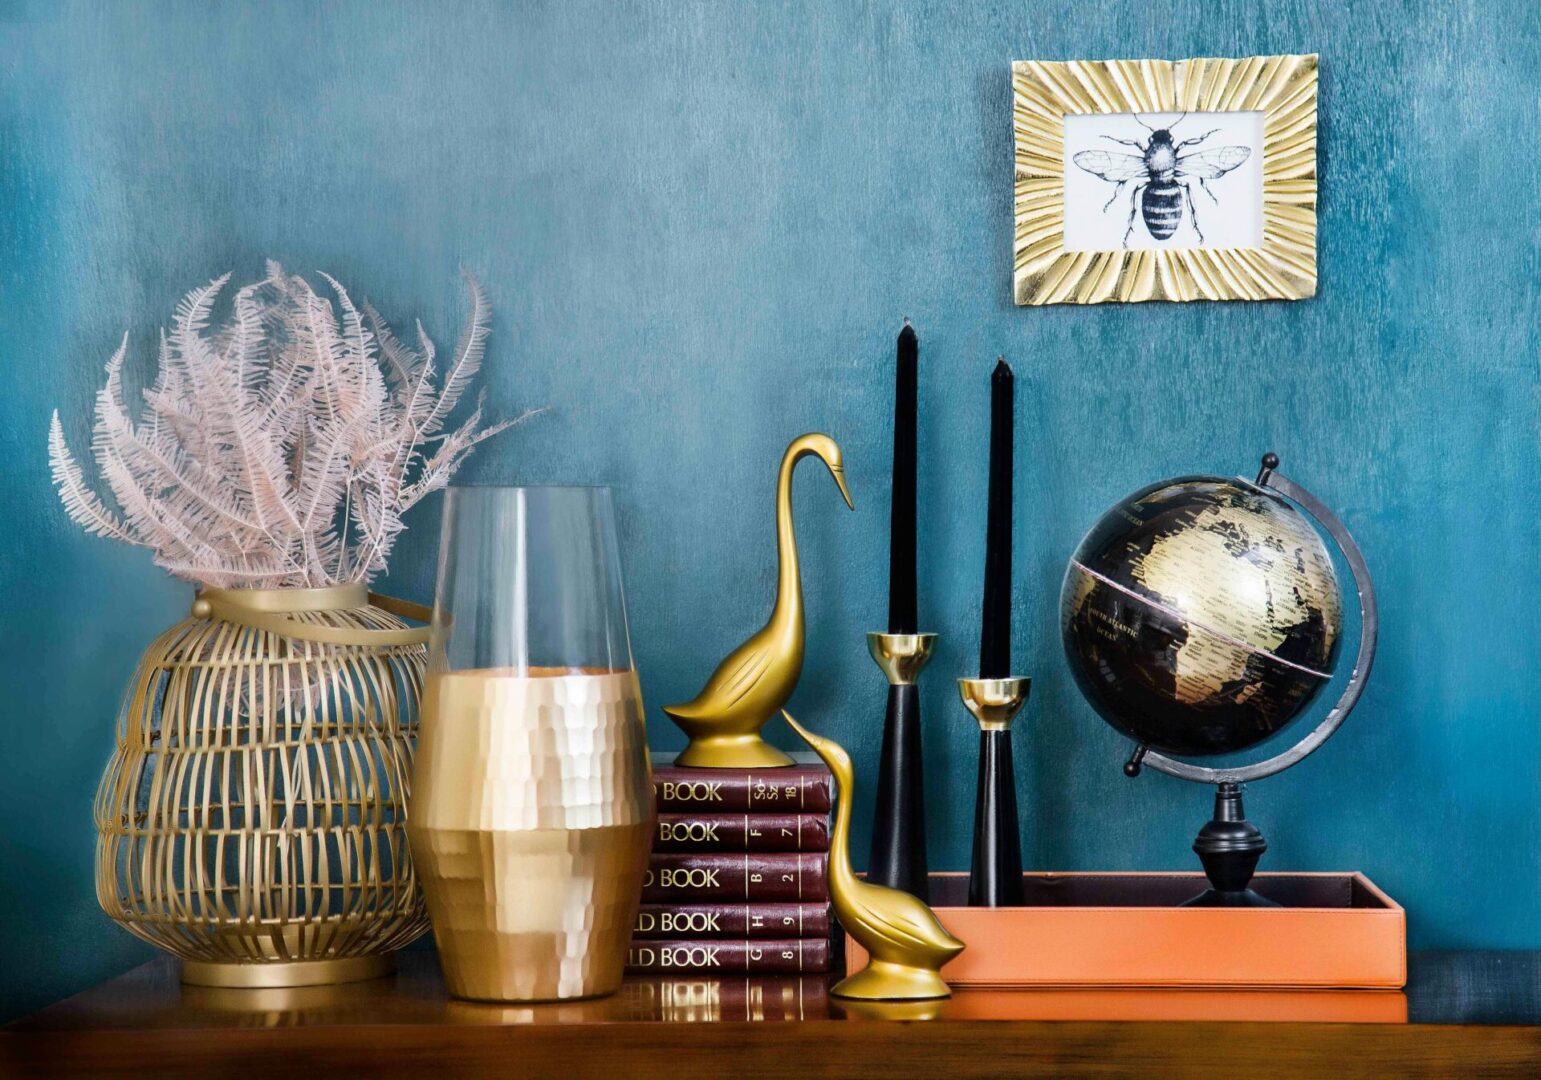 A blue wall with gold vases, books and a globe.